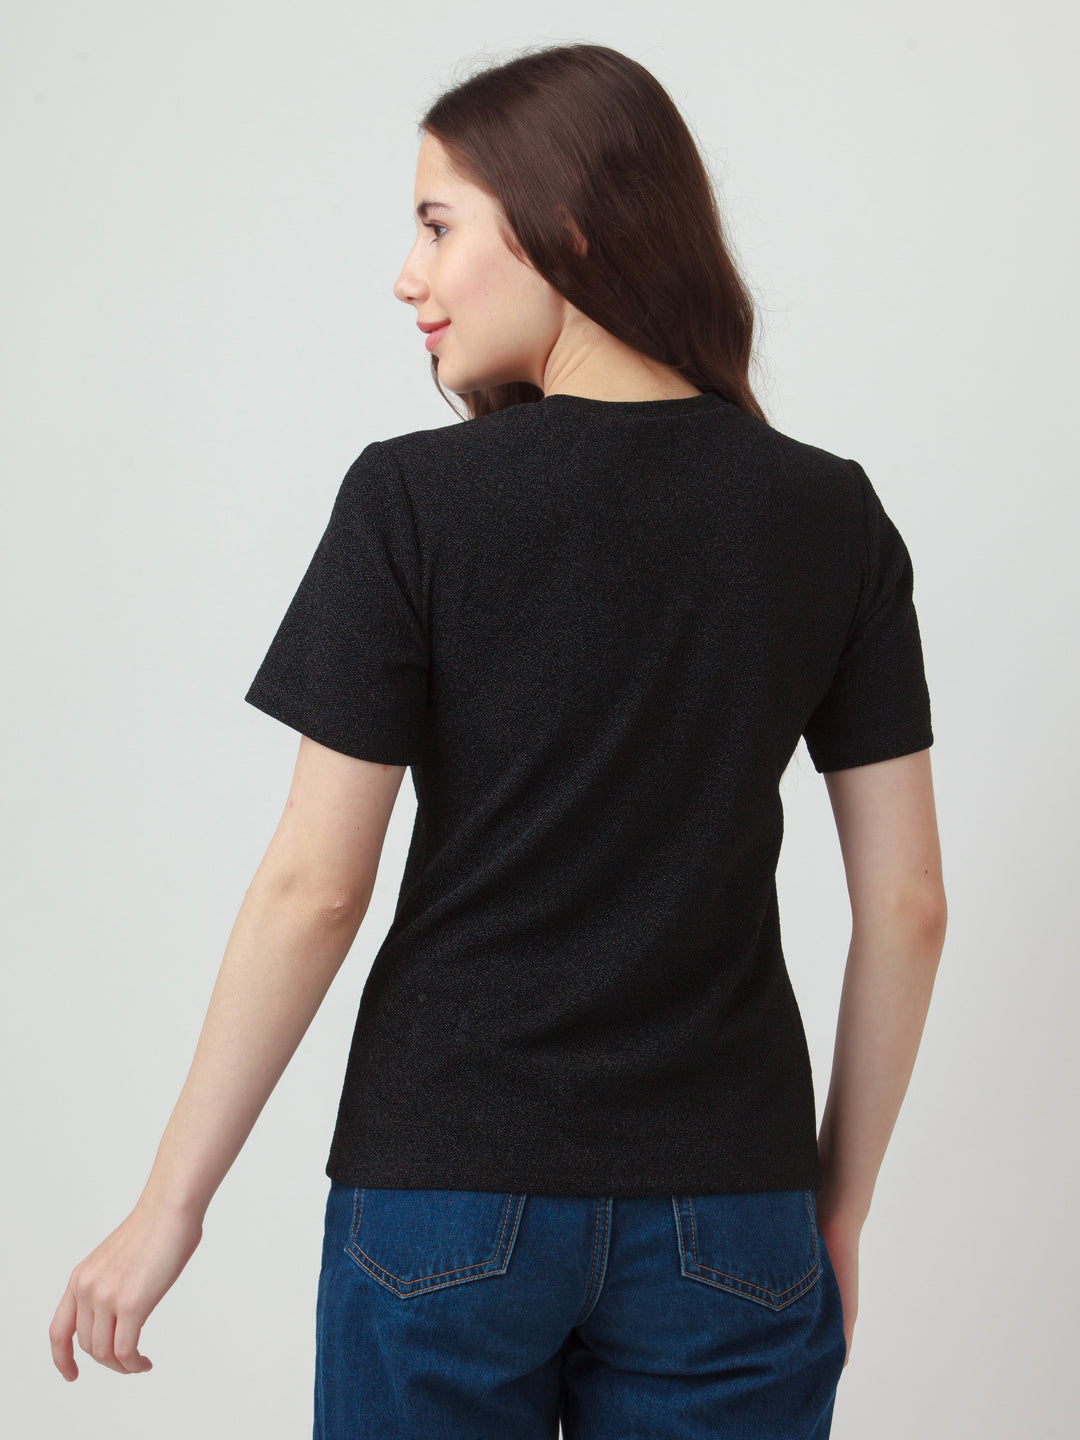 Black Solid Cut Out Top For Women